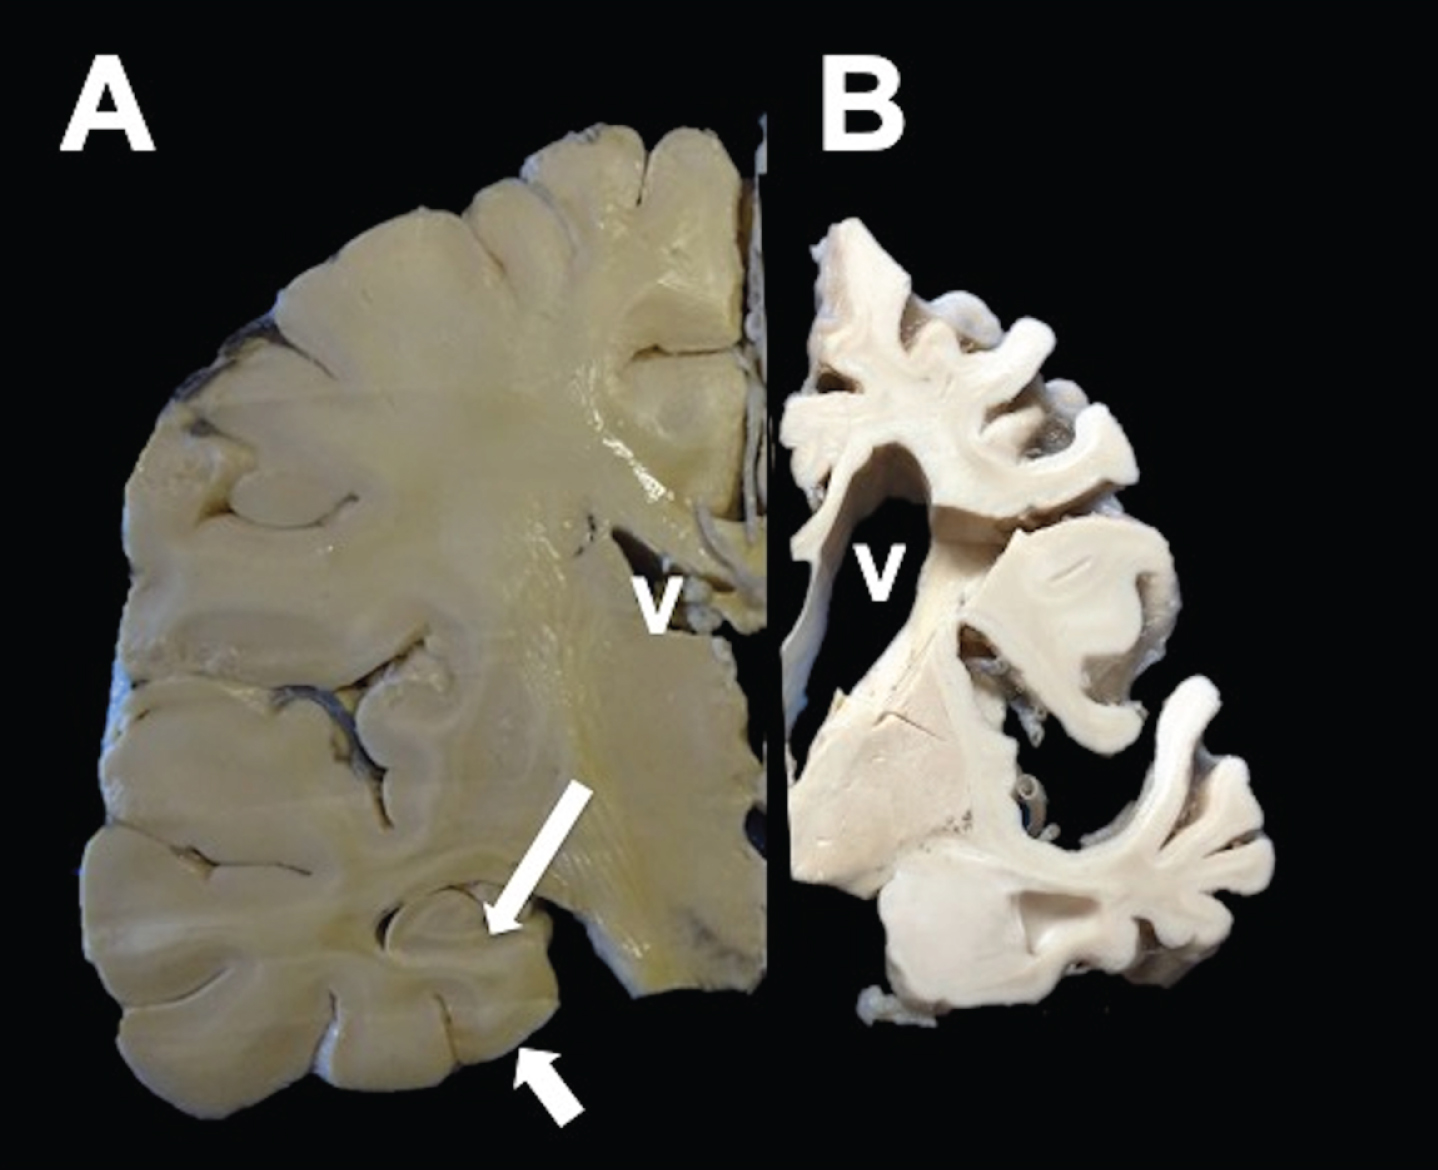 Coronal section of a healthy (left) and AD hemisphere (right). In AD, a considerable reduction in the brain volume with enlargement of the grooves between folds, prominent ventricles (V), and hippocampal atrophy (arrows) was observed.